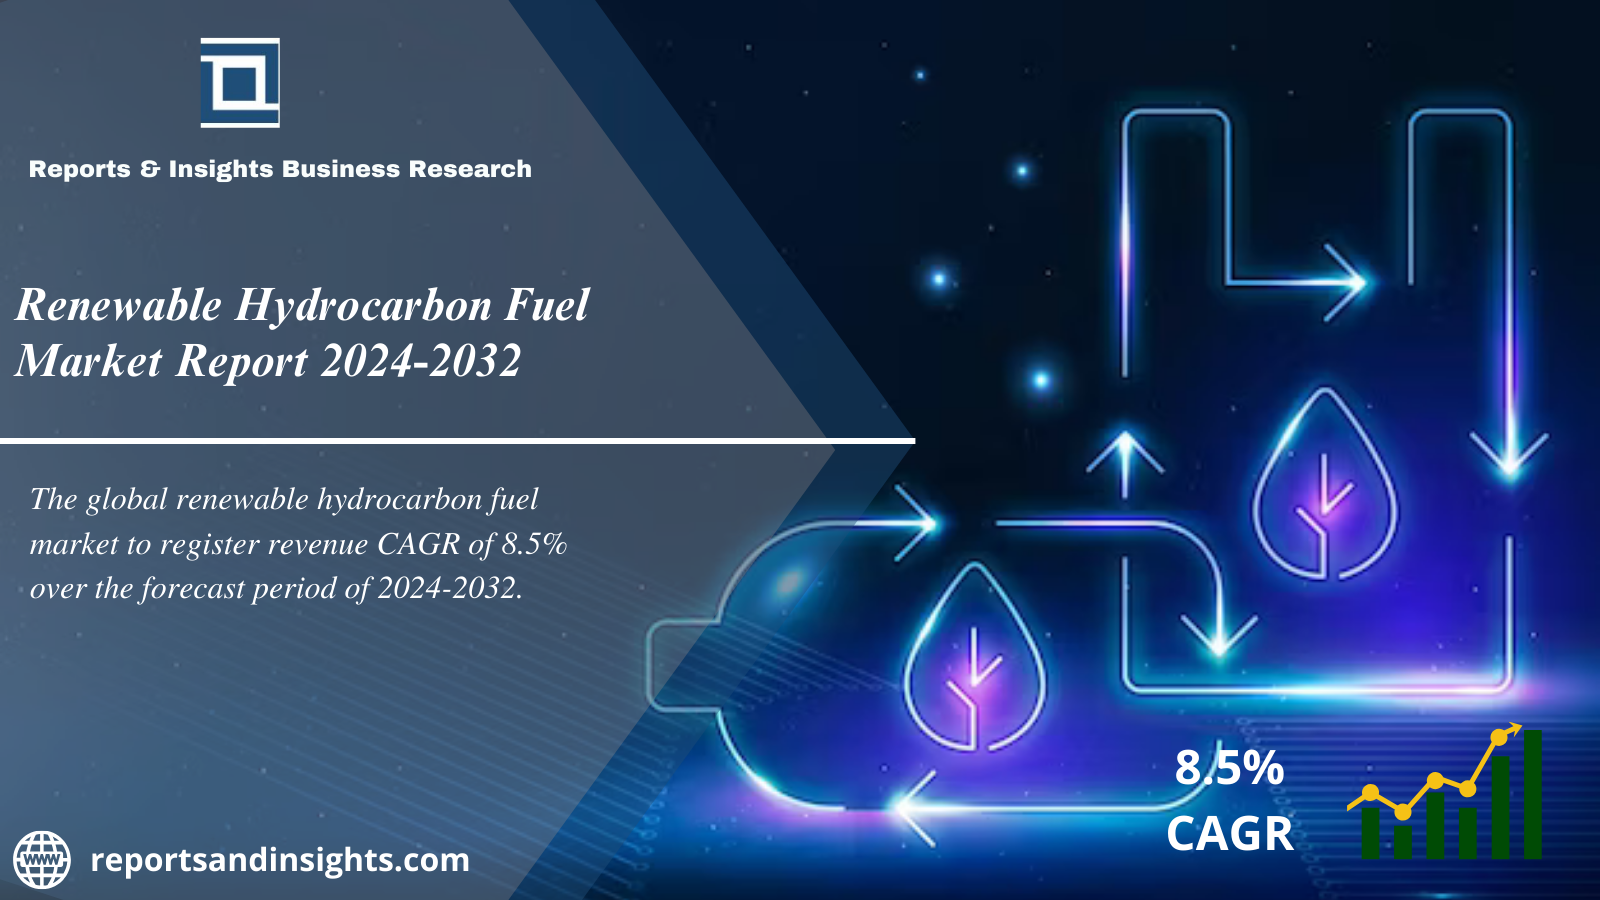 Renewable Hydrocarbon Fuel Market Research Report 2024 to 2032: Global Size, Share, Trends and Analysis